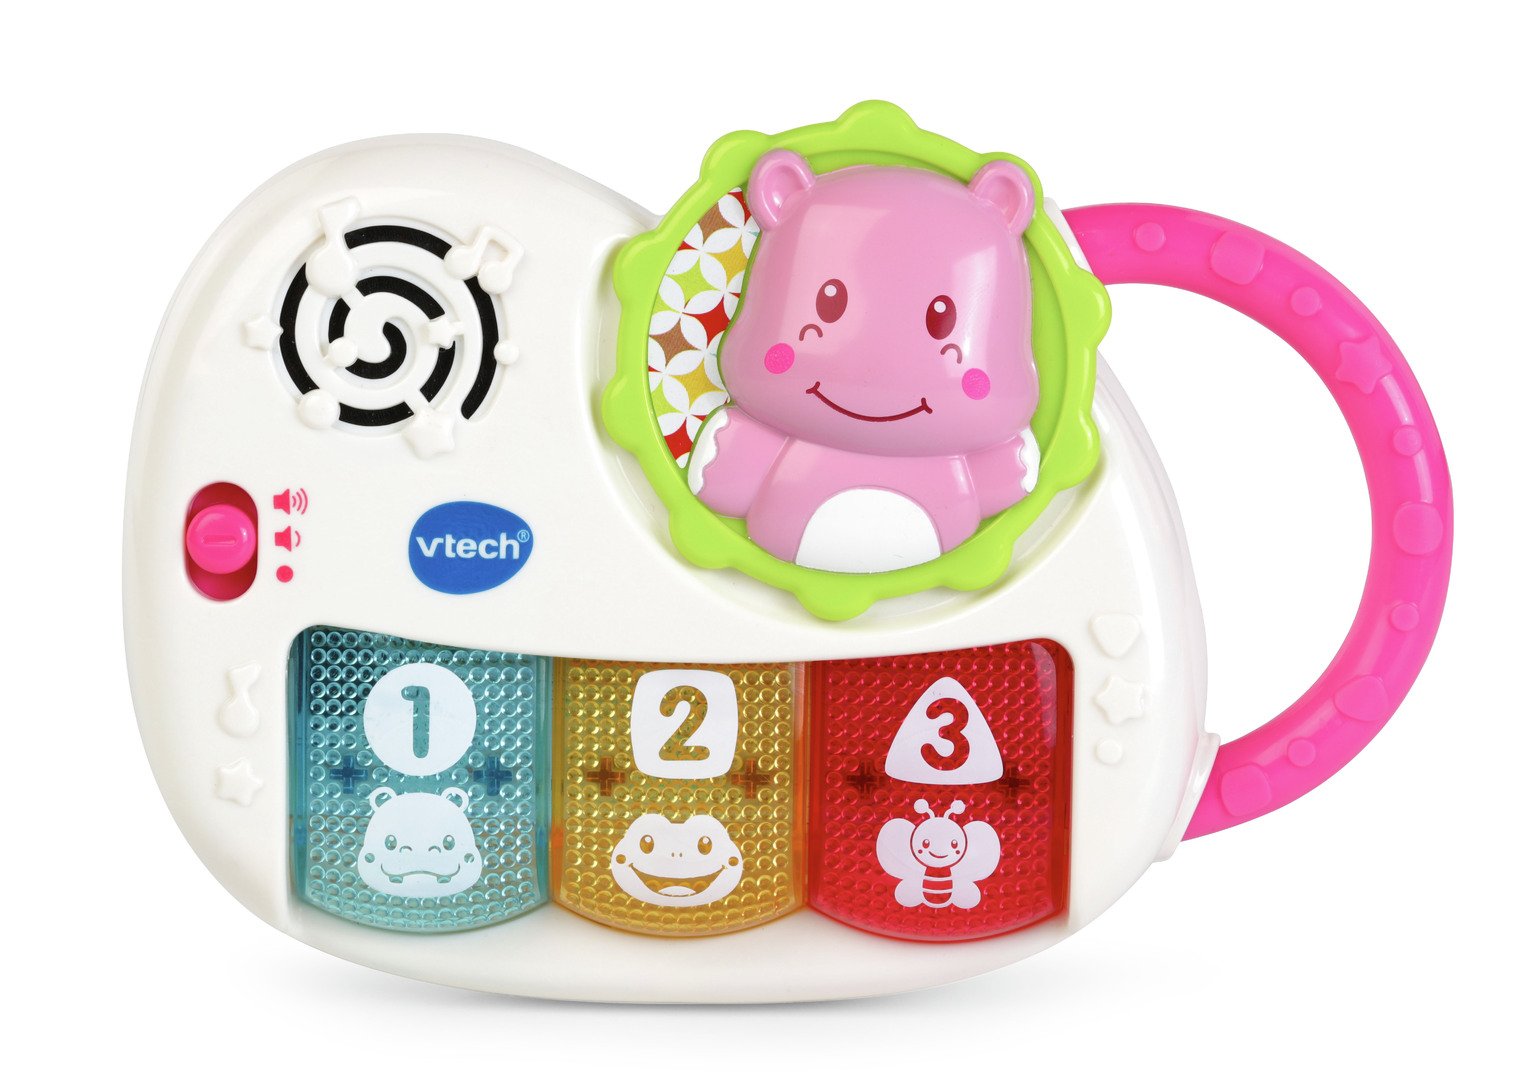 VTech My 1st Gift Set Review